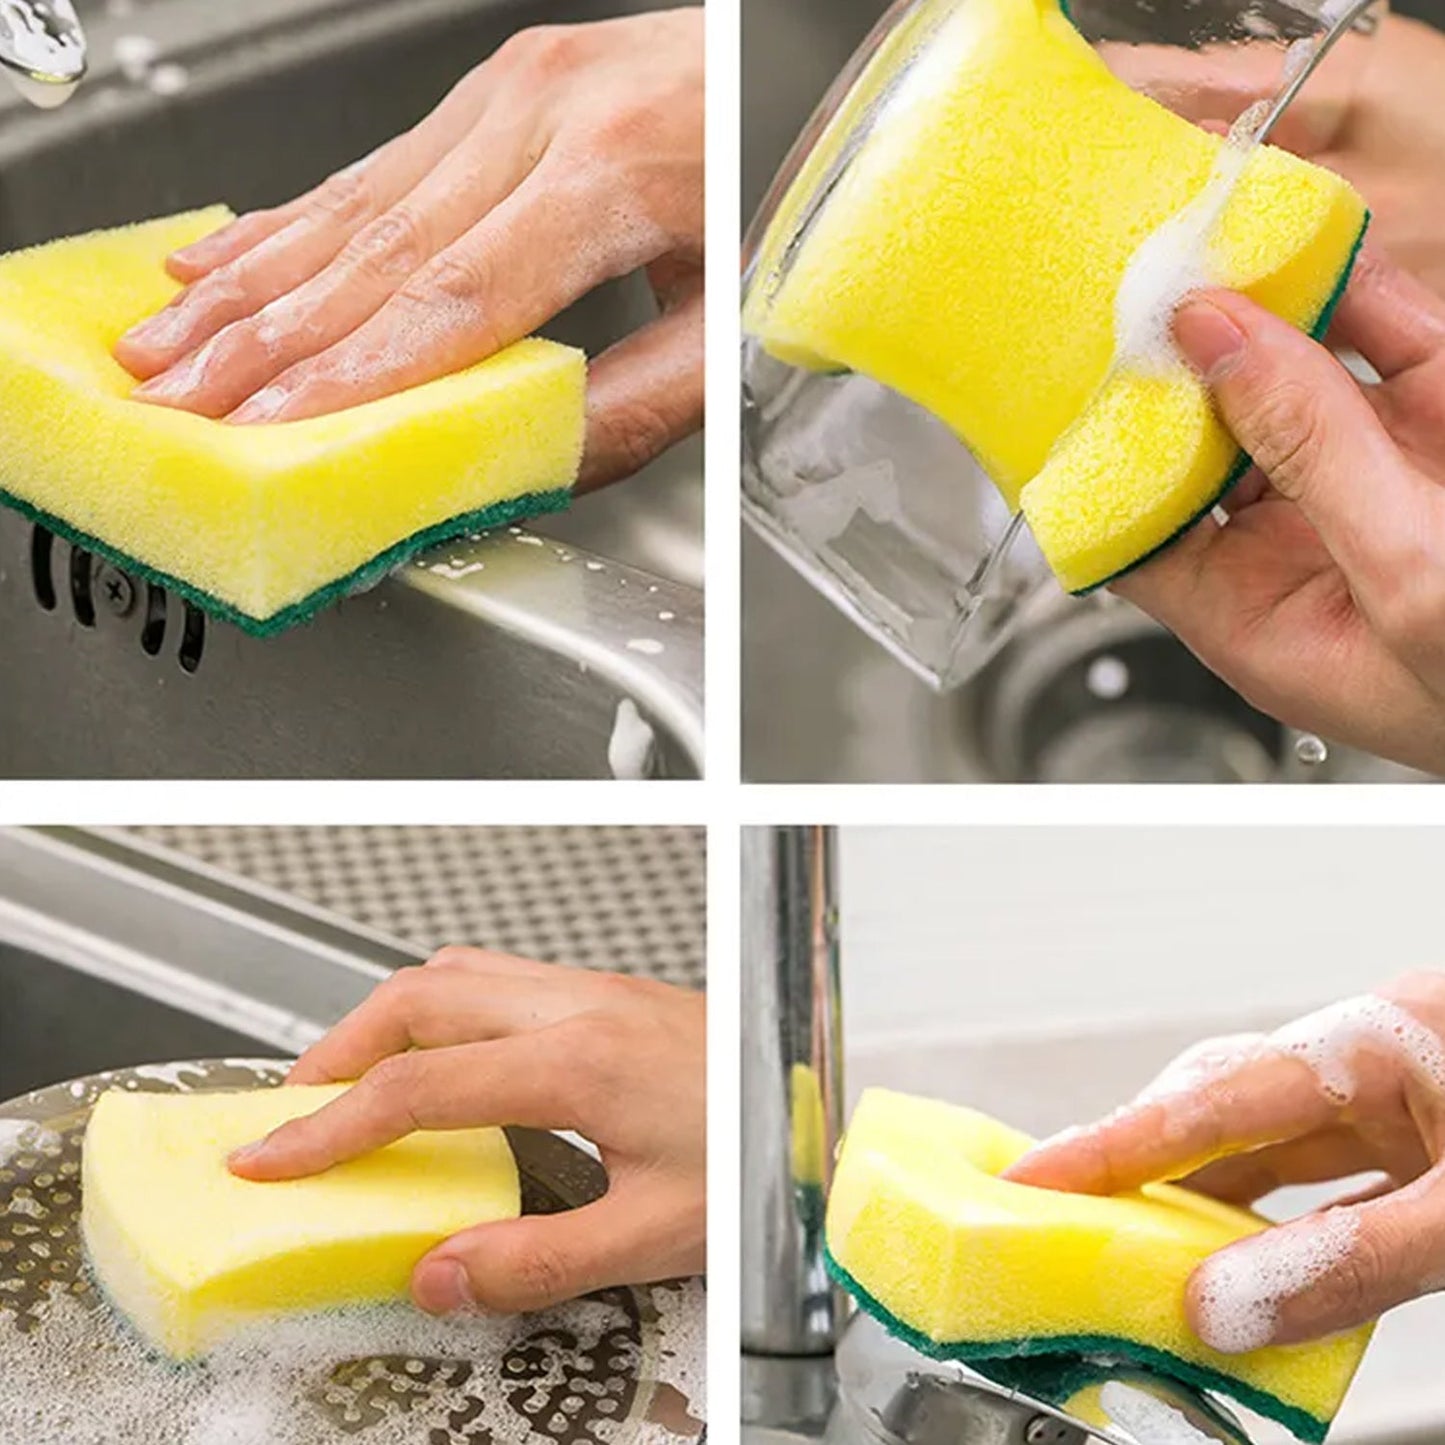 Multi-Purpose Small, Medium & Big 2 In 1 Color Scratch Scrub Sponges, Sponge, Wear Resistance, Dish Washing Tool, High Friction Resistance Furniture for Refrigerator Sofa for Kitchen, Household (1 Pc)